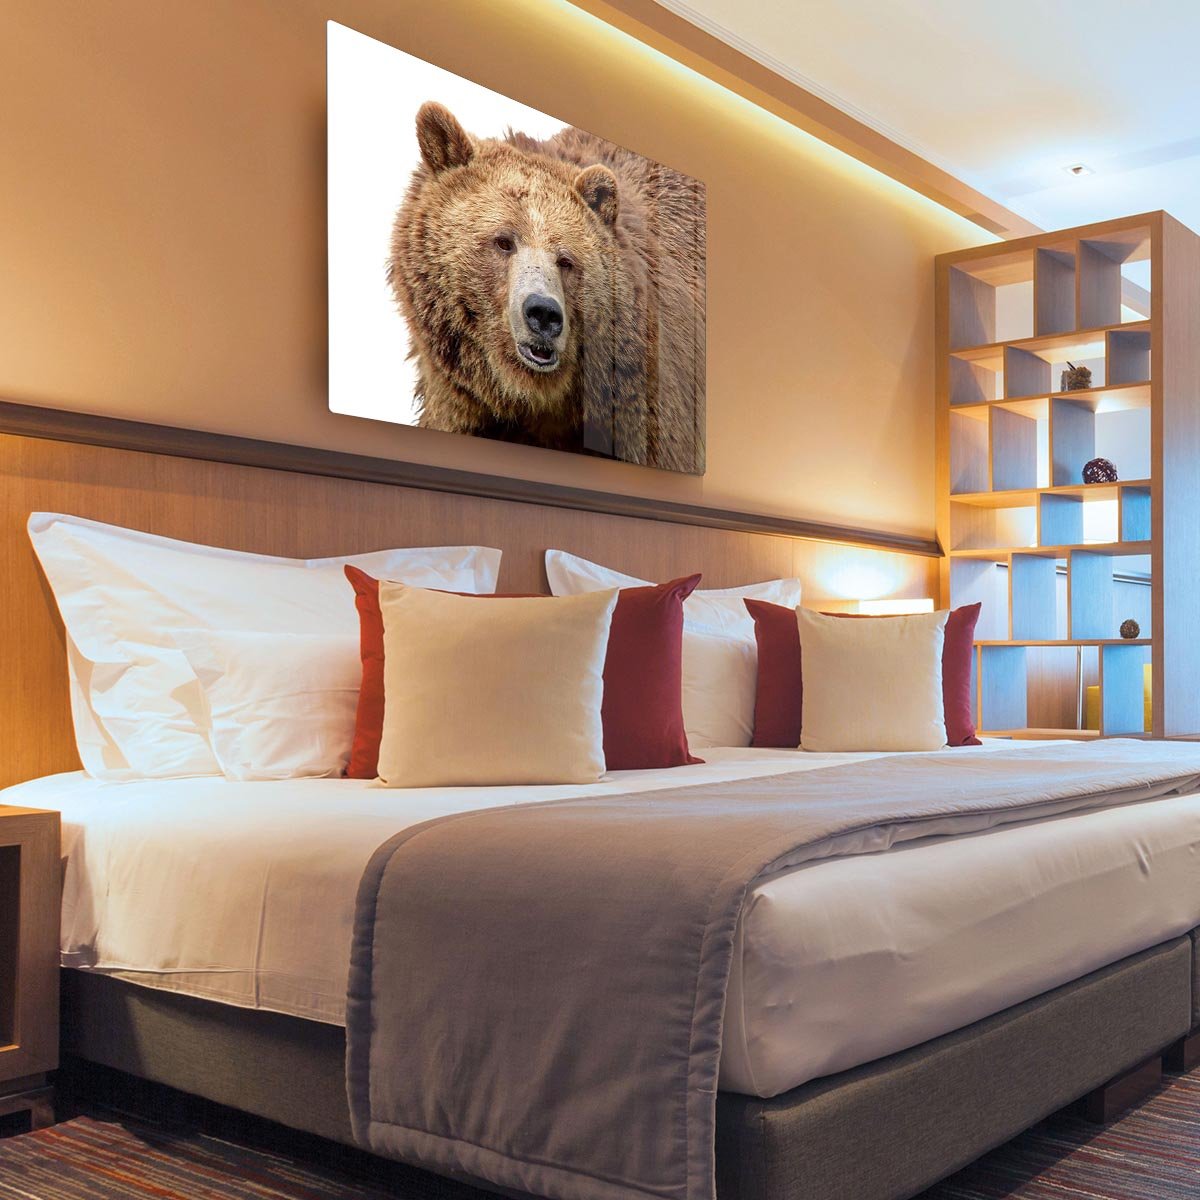 Detailed close-up portrait of a magnificent grizzly brown bear HD Metal Print - Canvas Art Rocks - 3